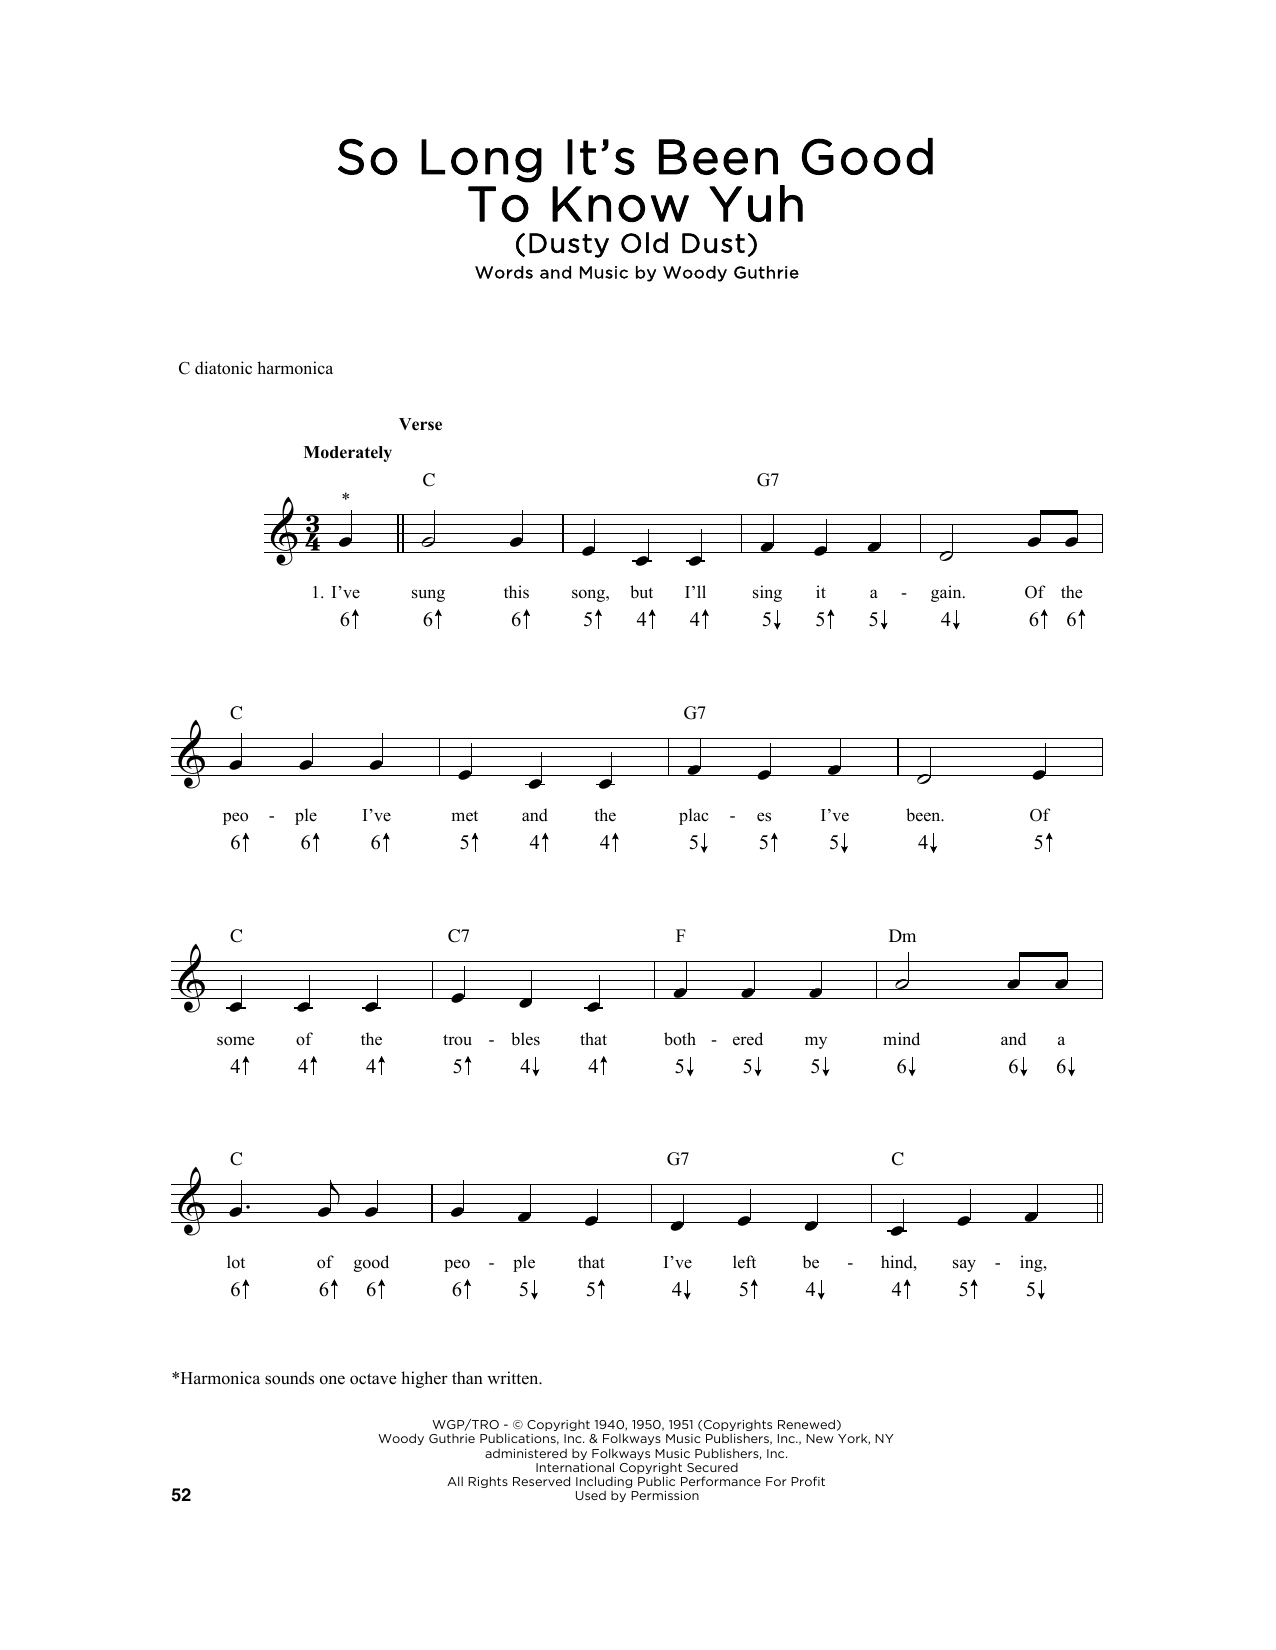 Download Woody Guthrie So Long It's Been Good To Know Yuh (Dus Sheet Music